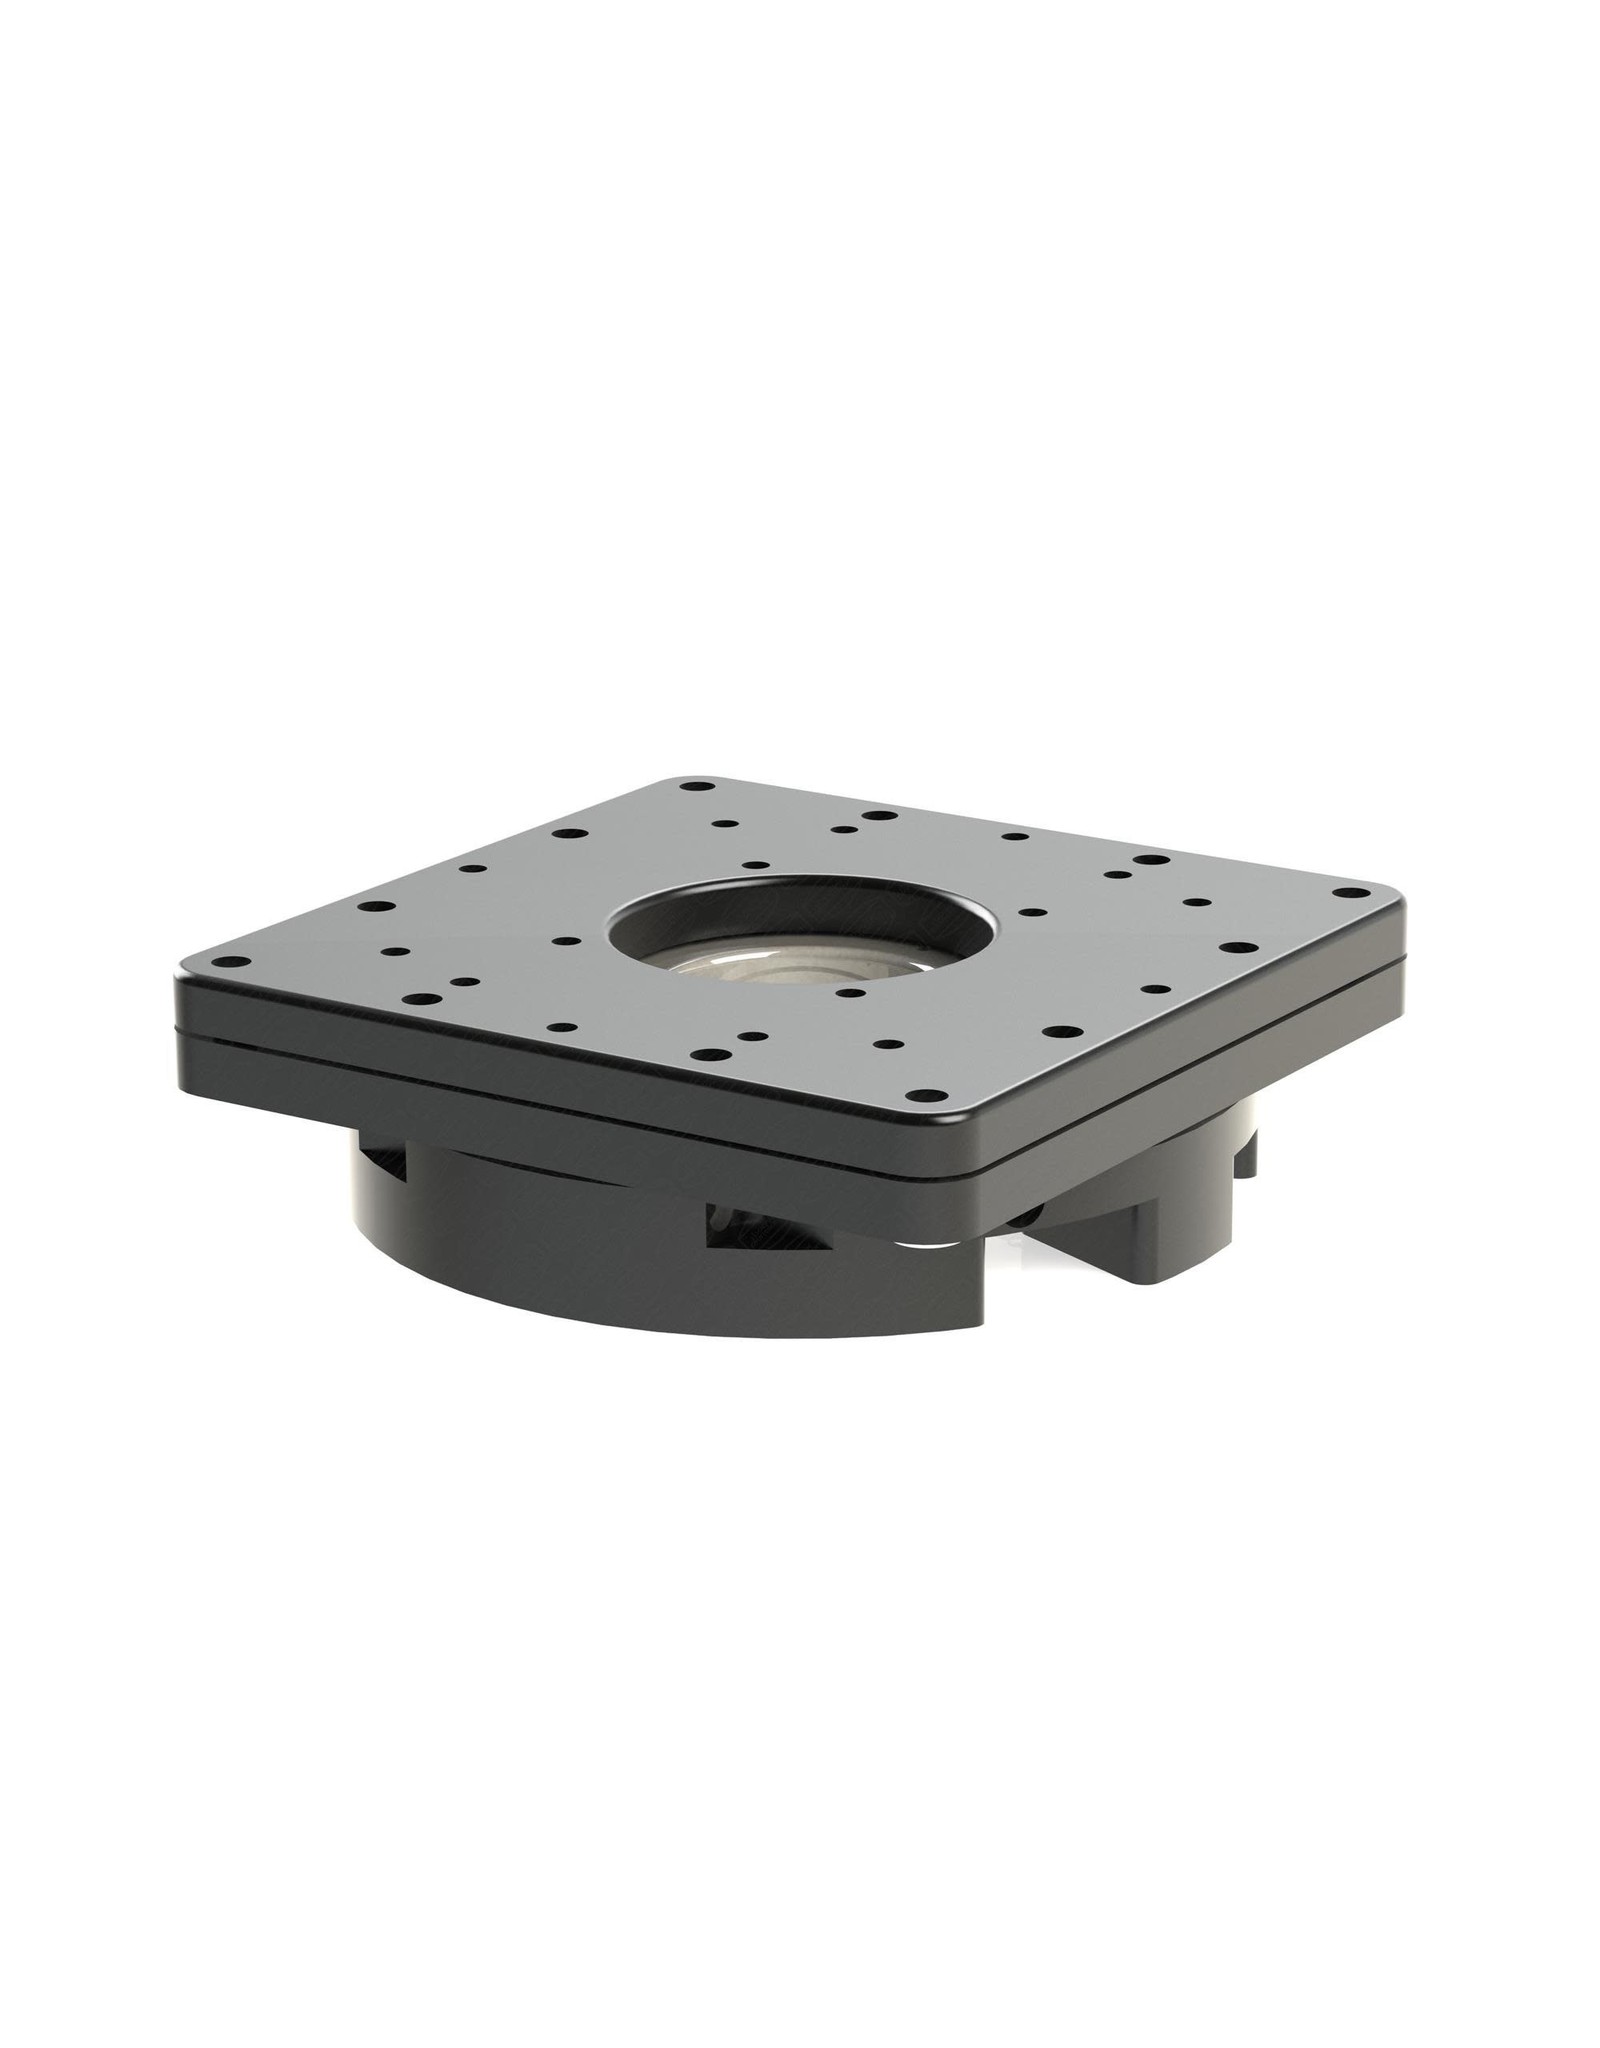 Baader Planetarium Baader Pan Adjuster for adjusting the optical axis of parallel mounted telescopes